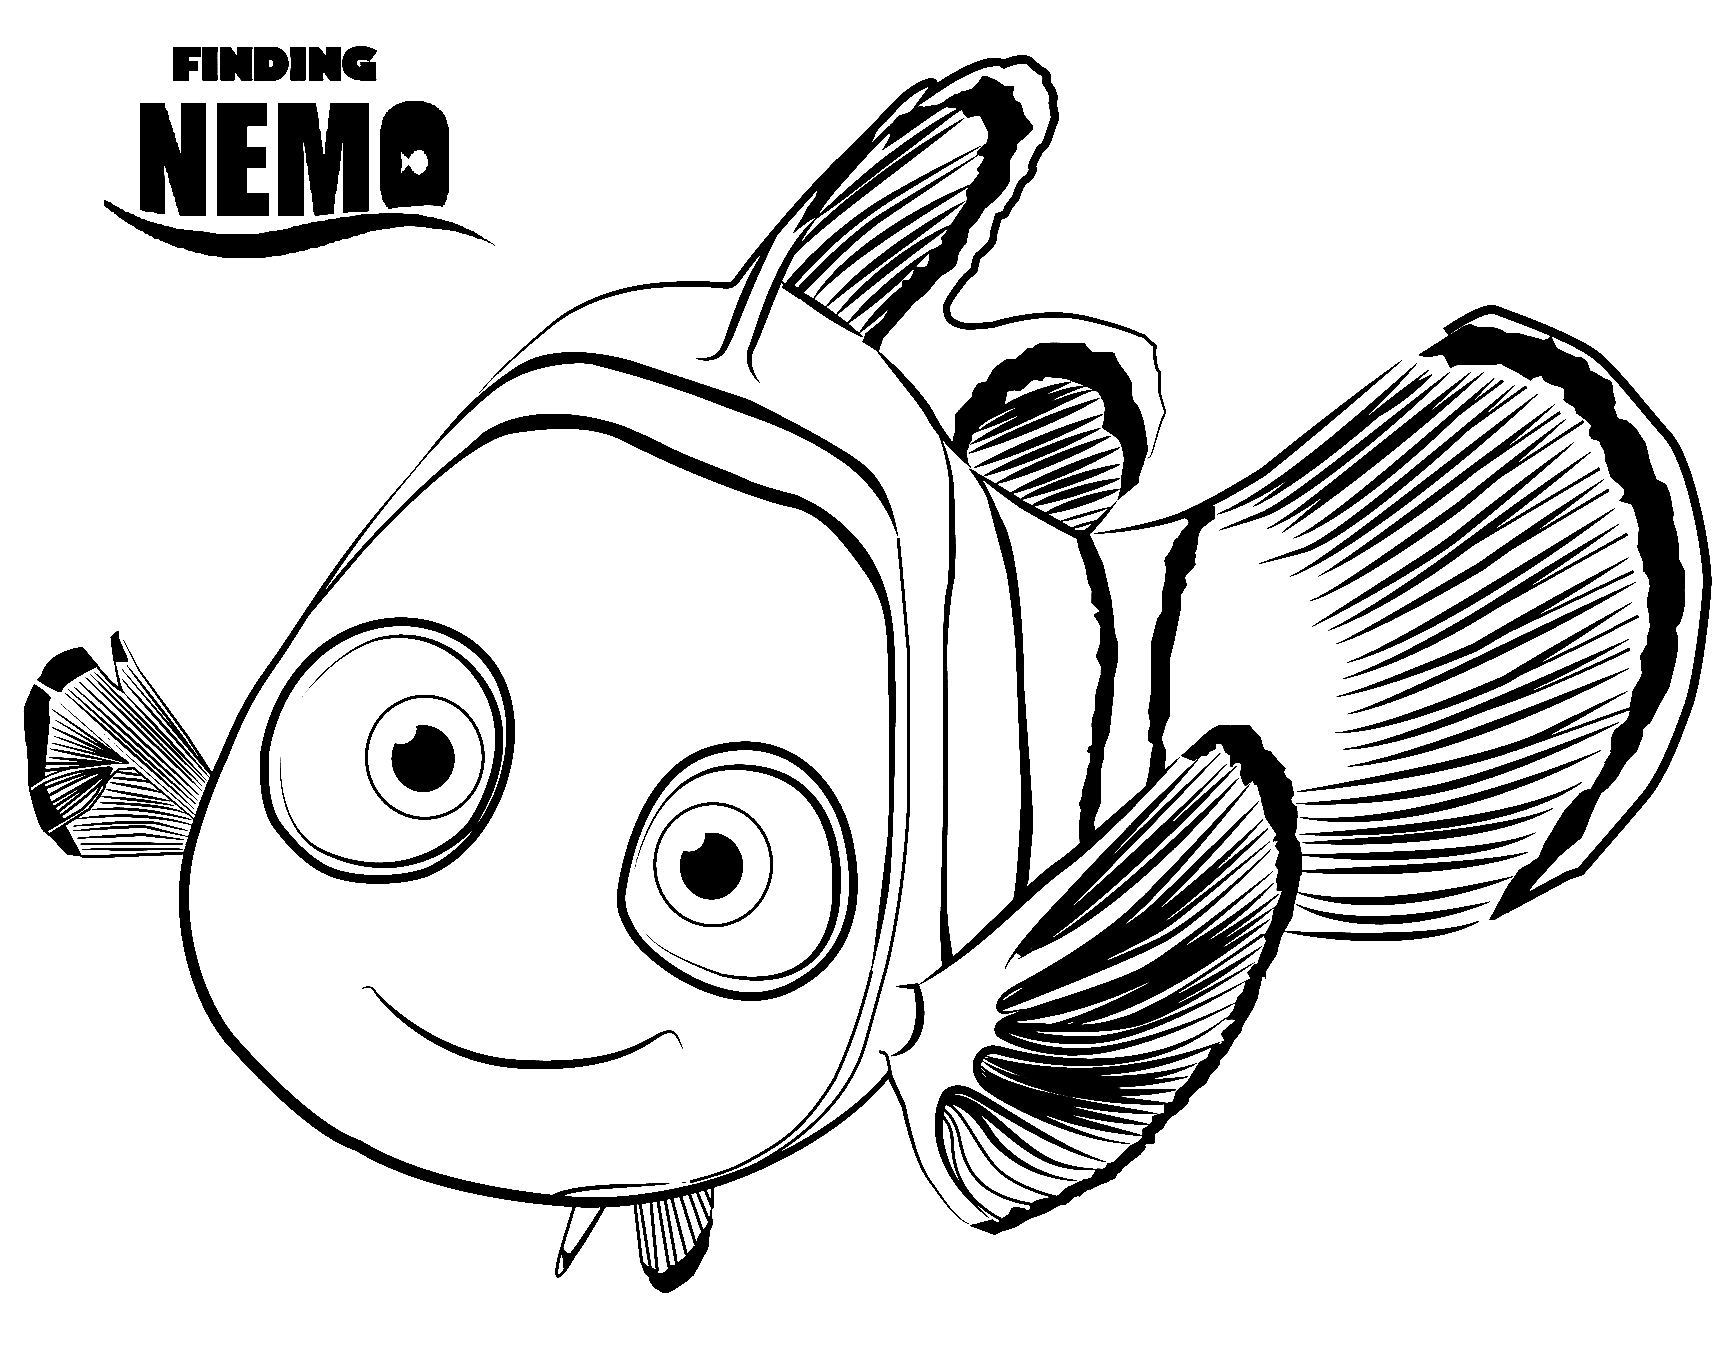 Nemo Coloring Pages   Finding Nemo Coloring Pages   Coloring Pages ...